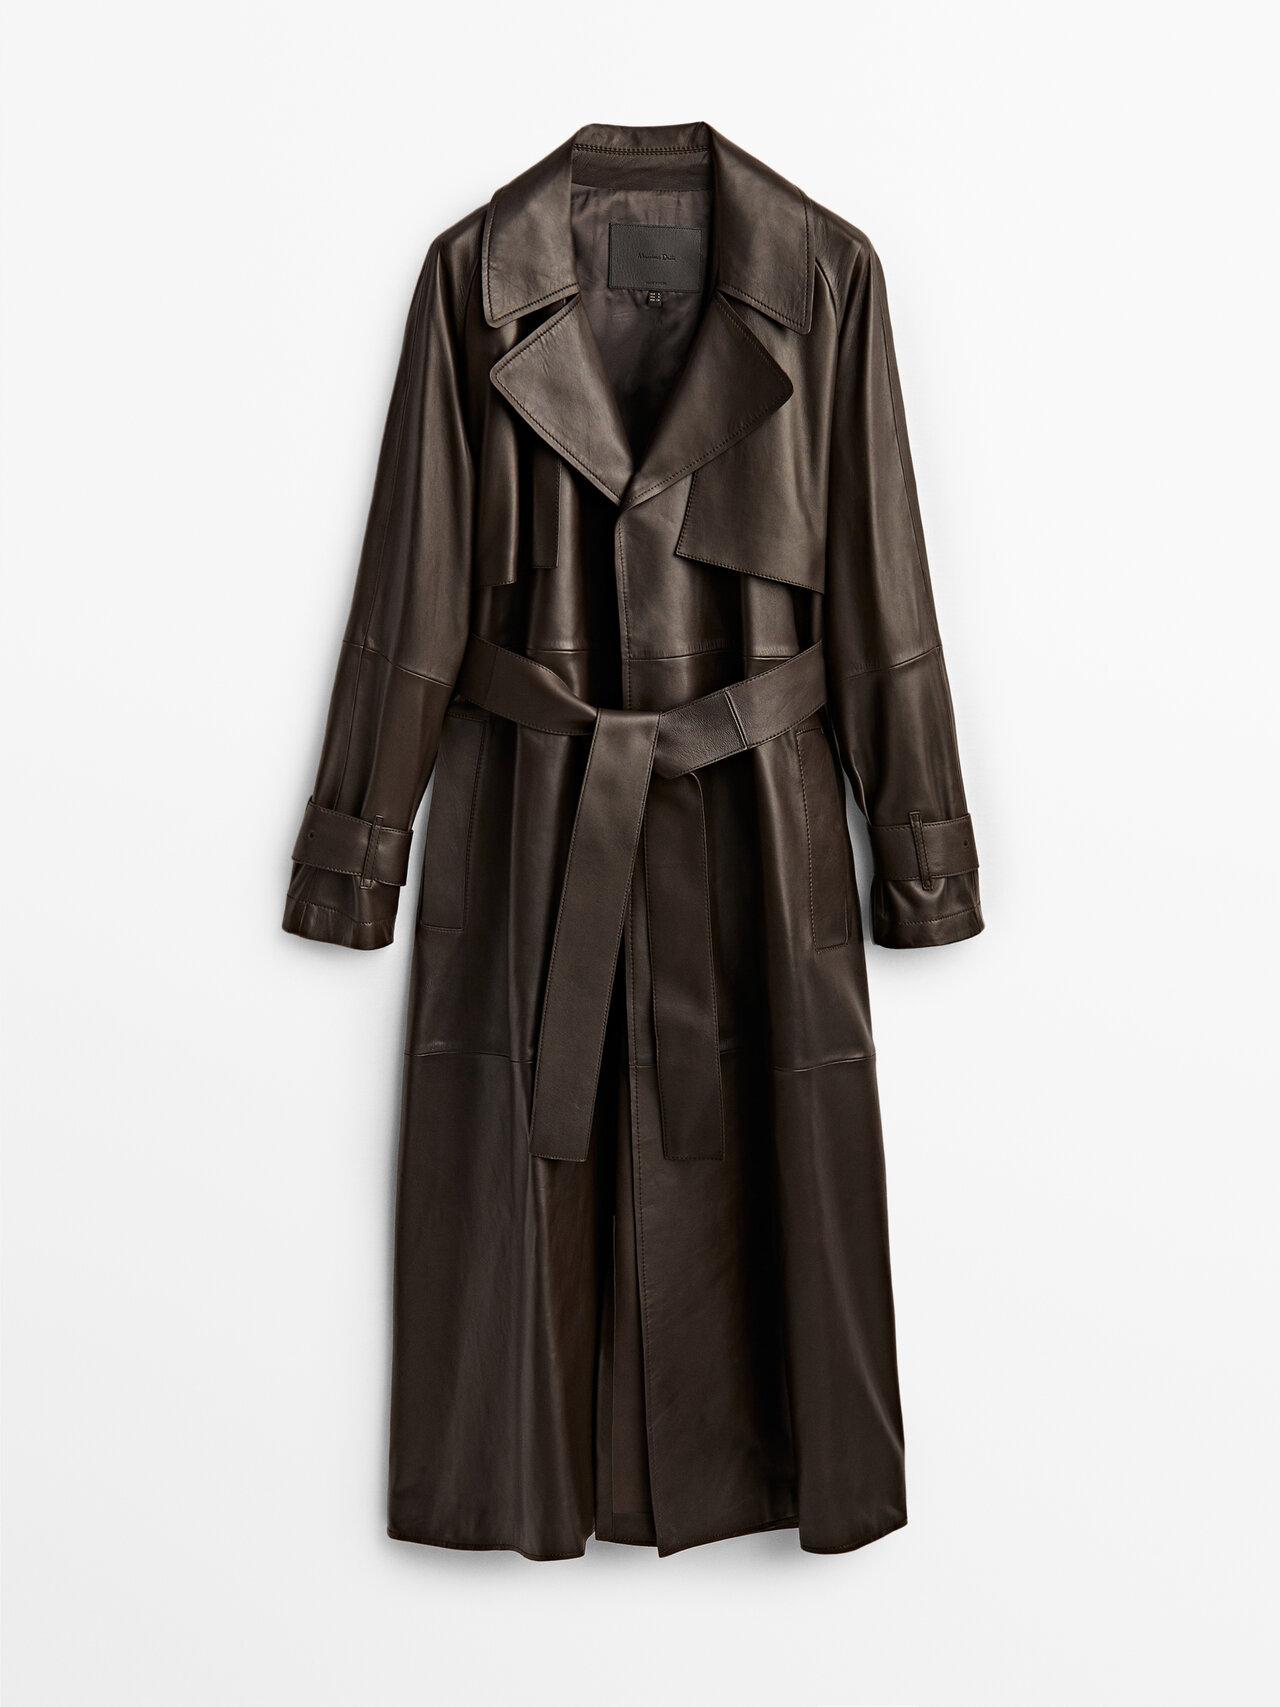 MASSIMO DUTTI Nappa Leather Trench-style Coat With Belt in Brown | Lyst